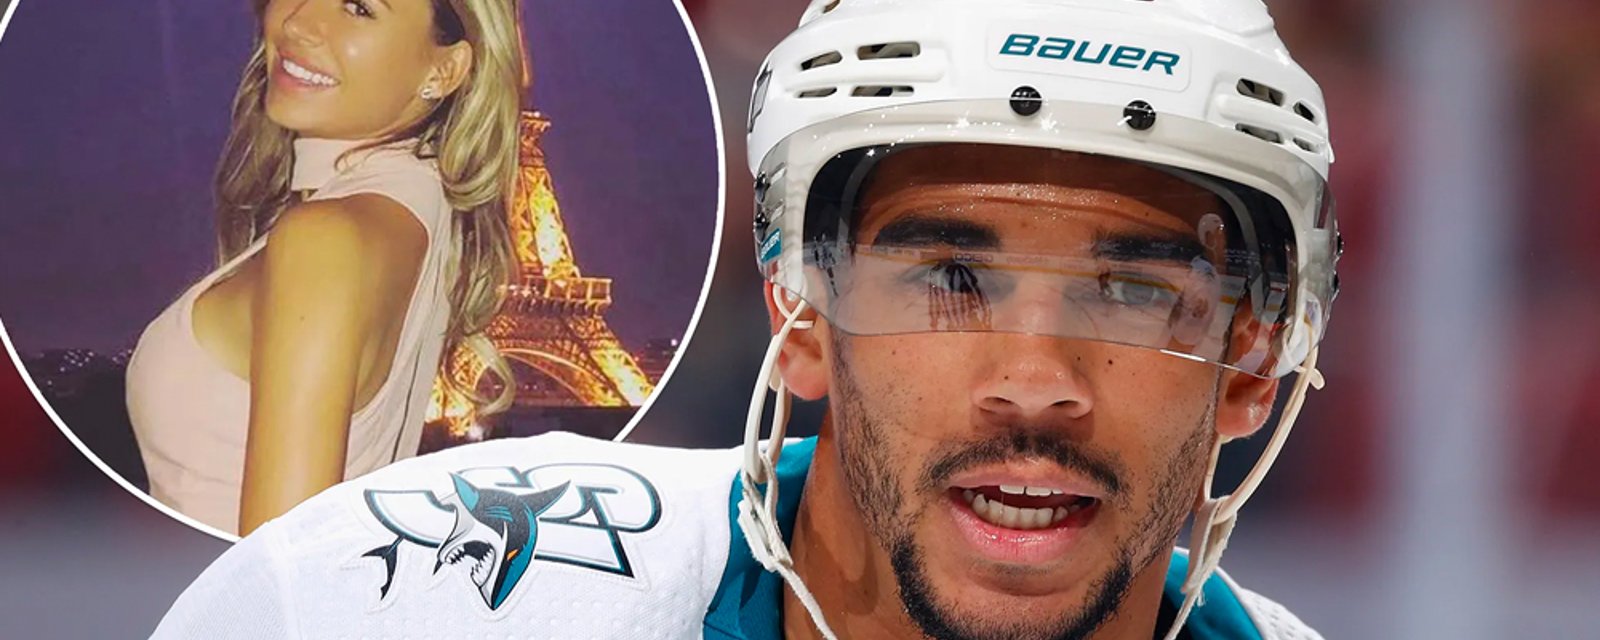 Report: Another disappointing update on the Evander Kane situation courtesy of Sharks insider Kevin Kurz